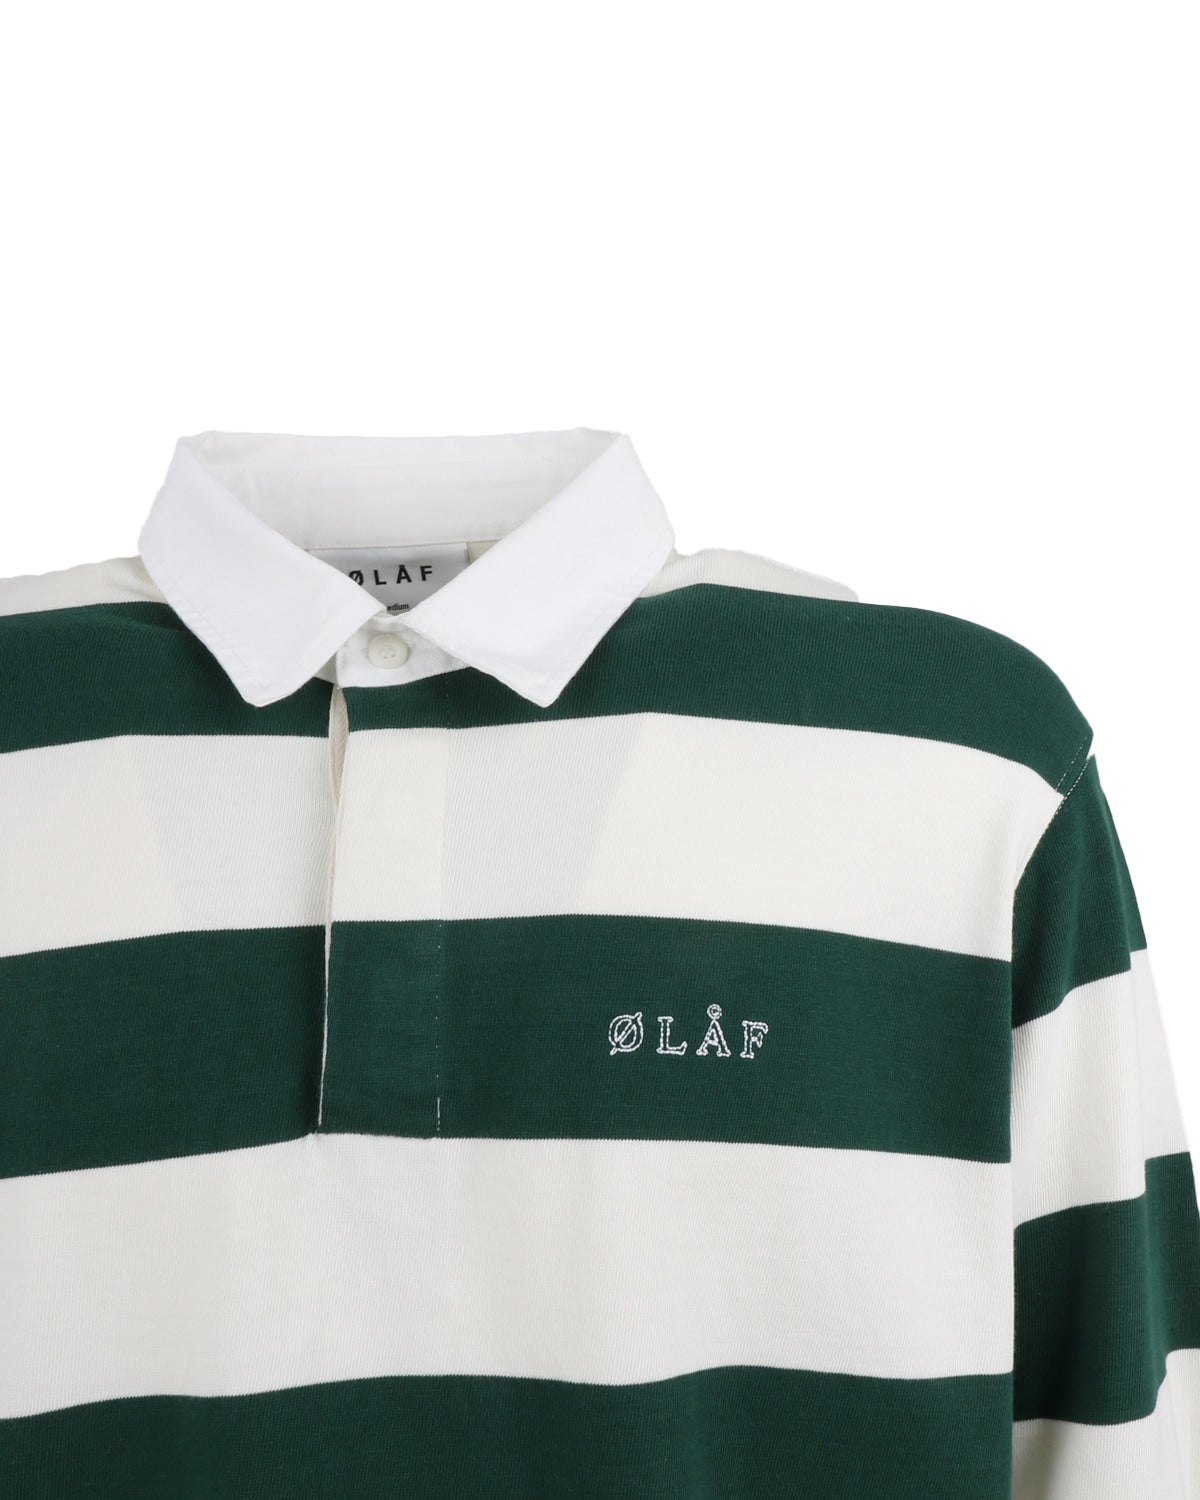 olaf hussein_olaf striped polo_white forest green_3_3